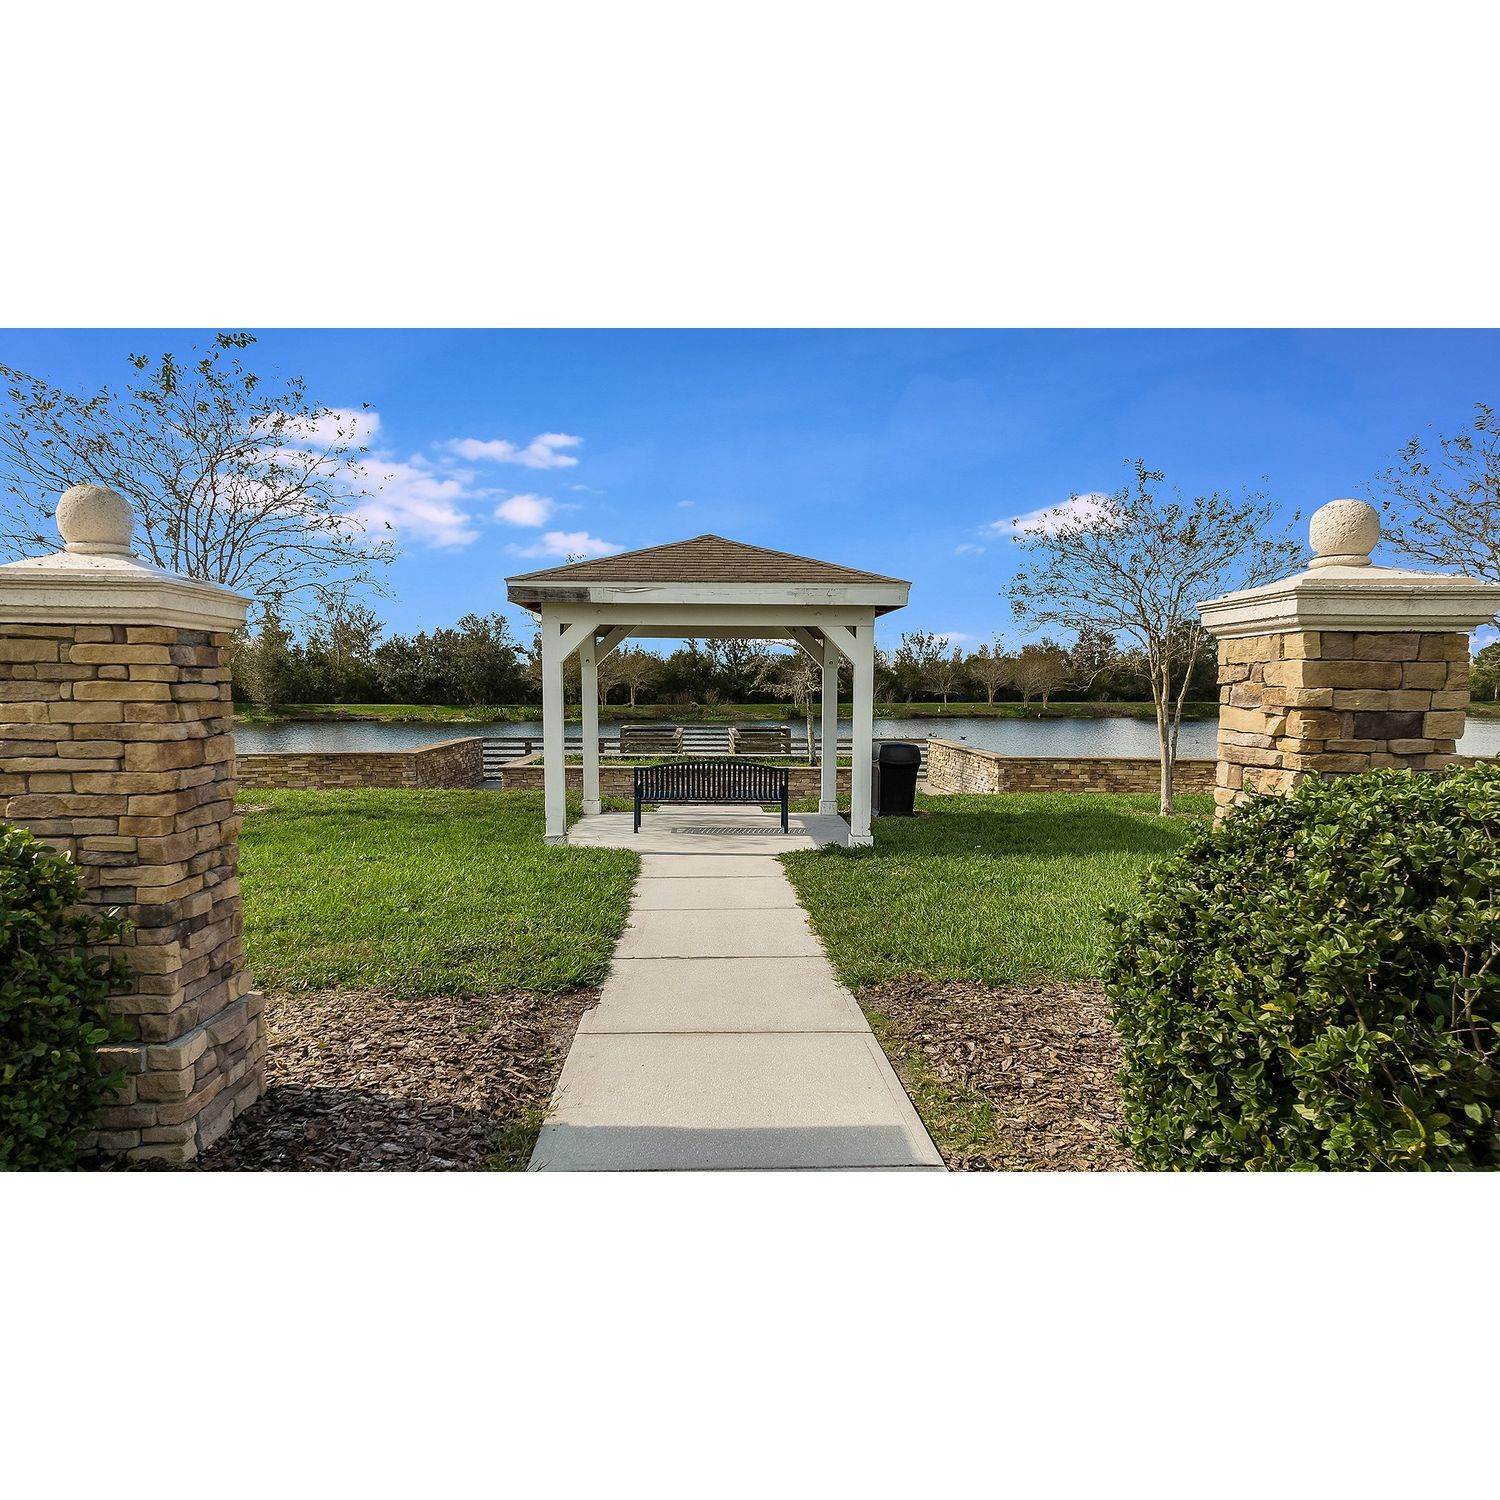 45. The Townhomes at Anthem Park建於 4590 Calvary Way, St. Cloud, FL 34769